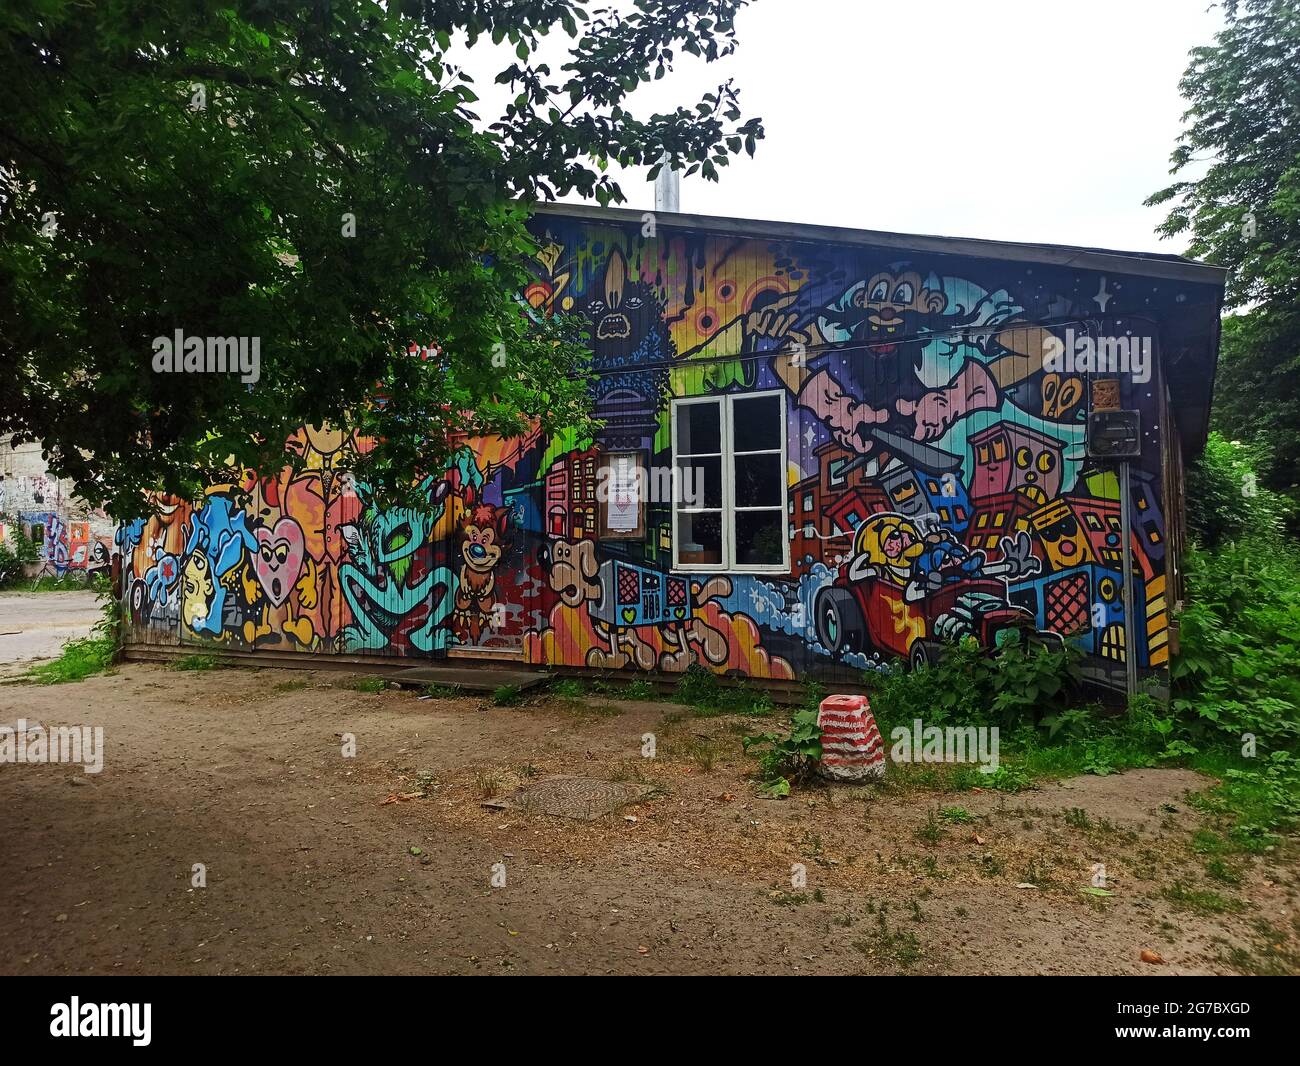 Copenhagen, Denmark - July 2021: Colorful graffiti wall of a small building in Freetown Christiania area. Stock Photo